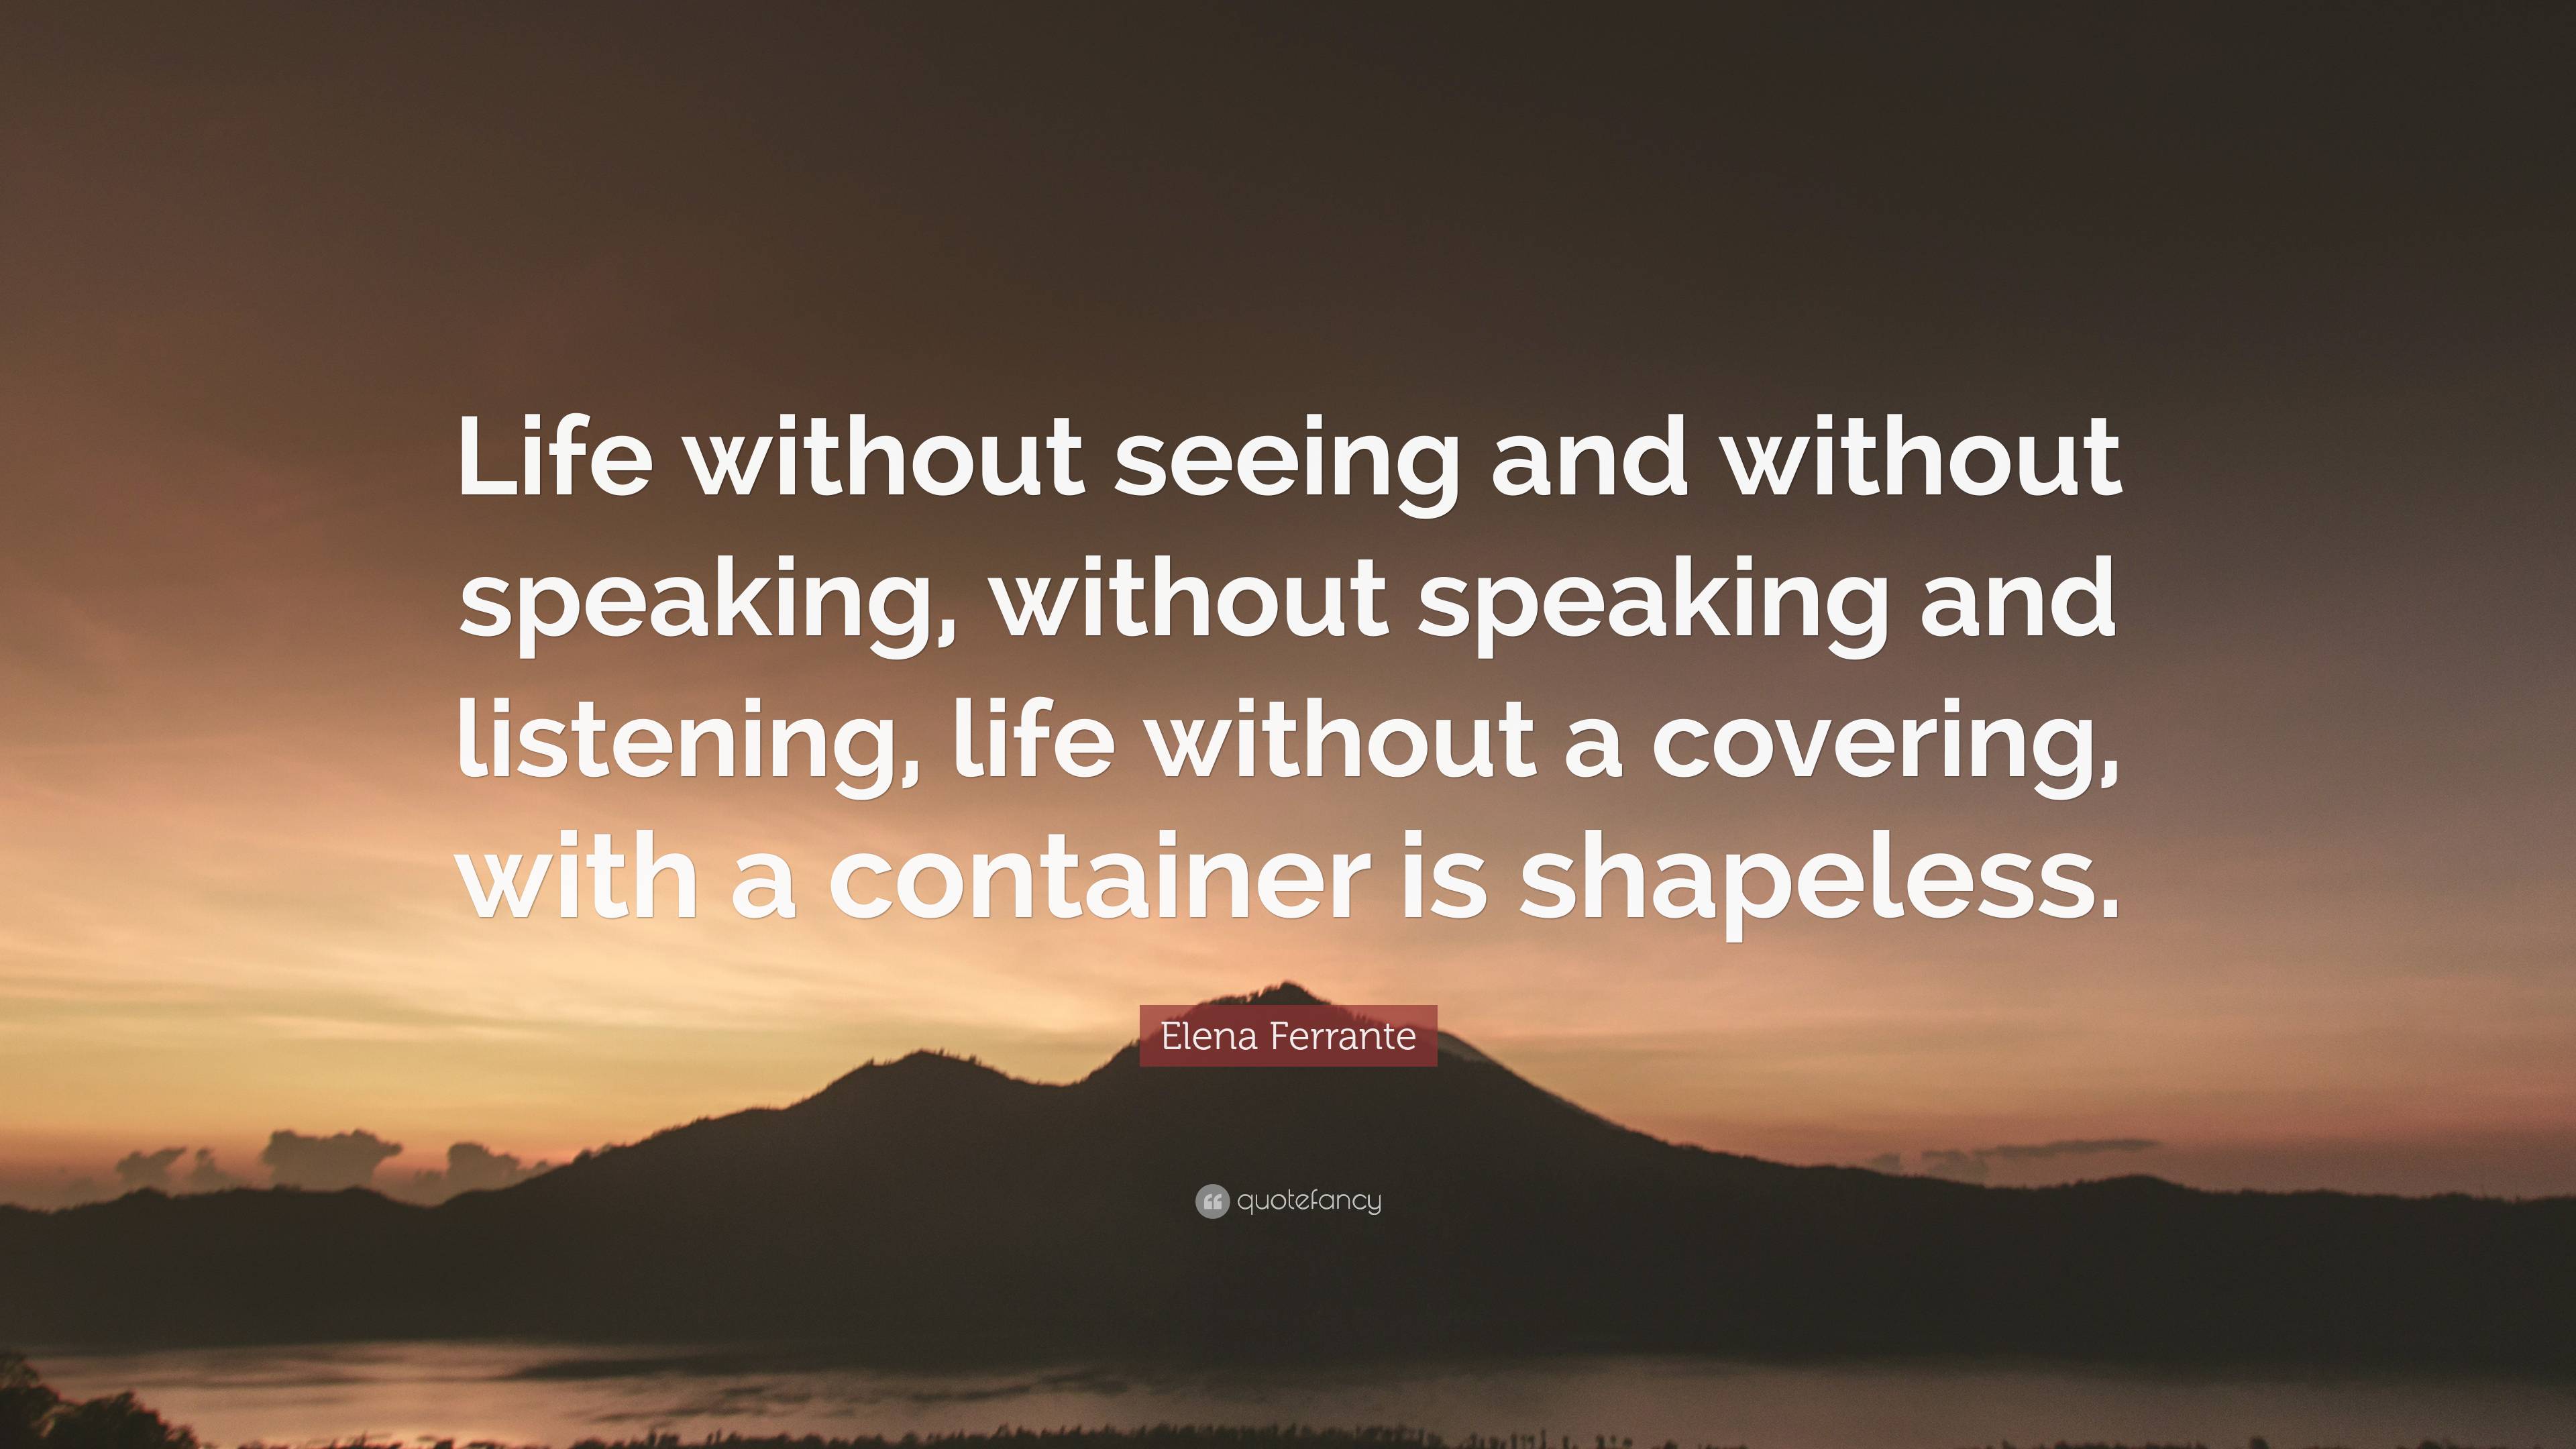 Elena Ferrante Quote: “Life without seeing and without speaking ...